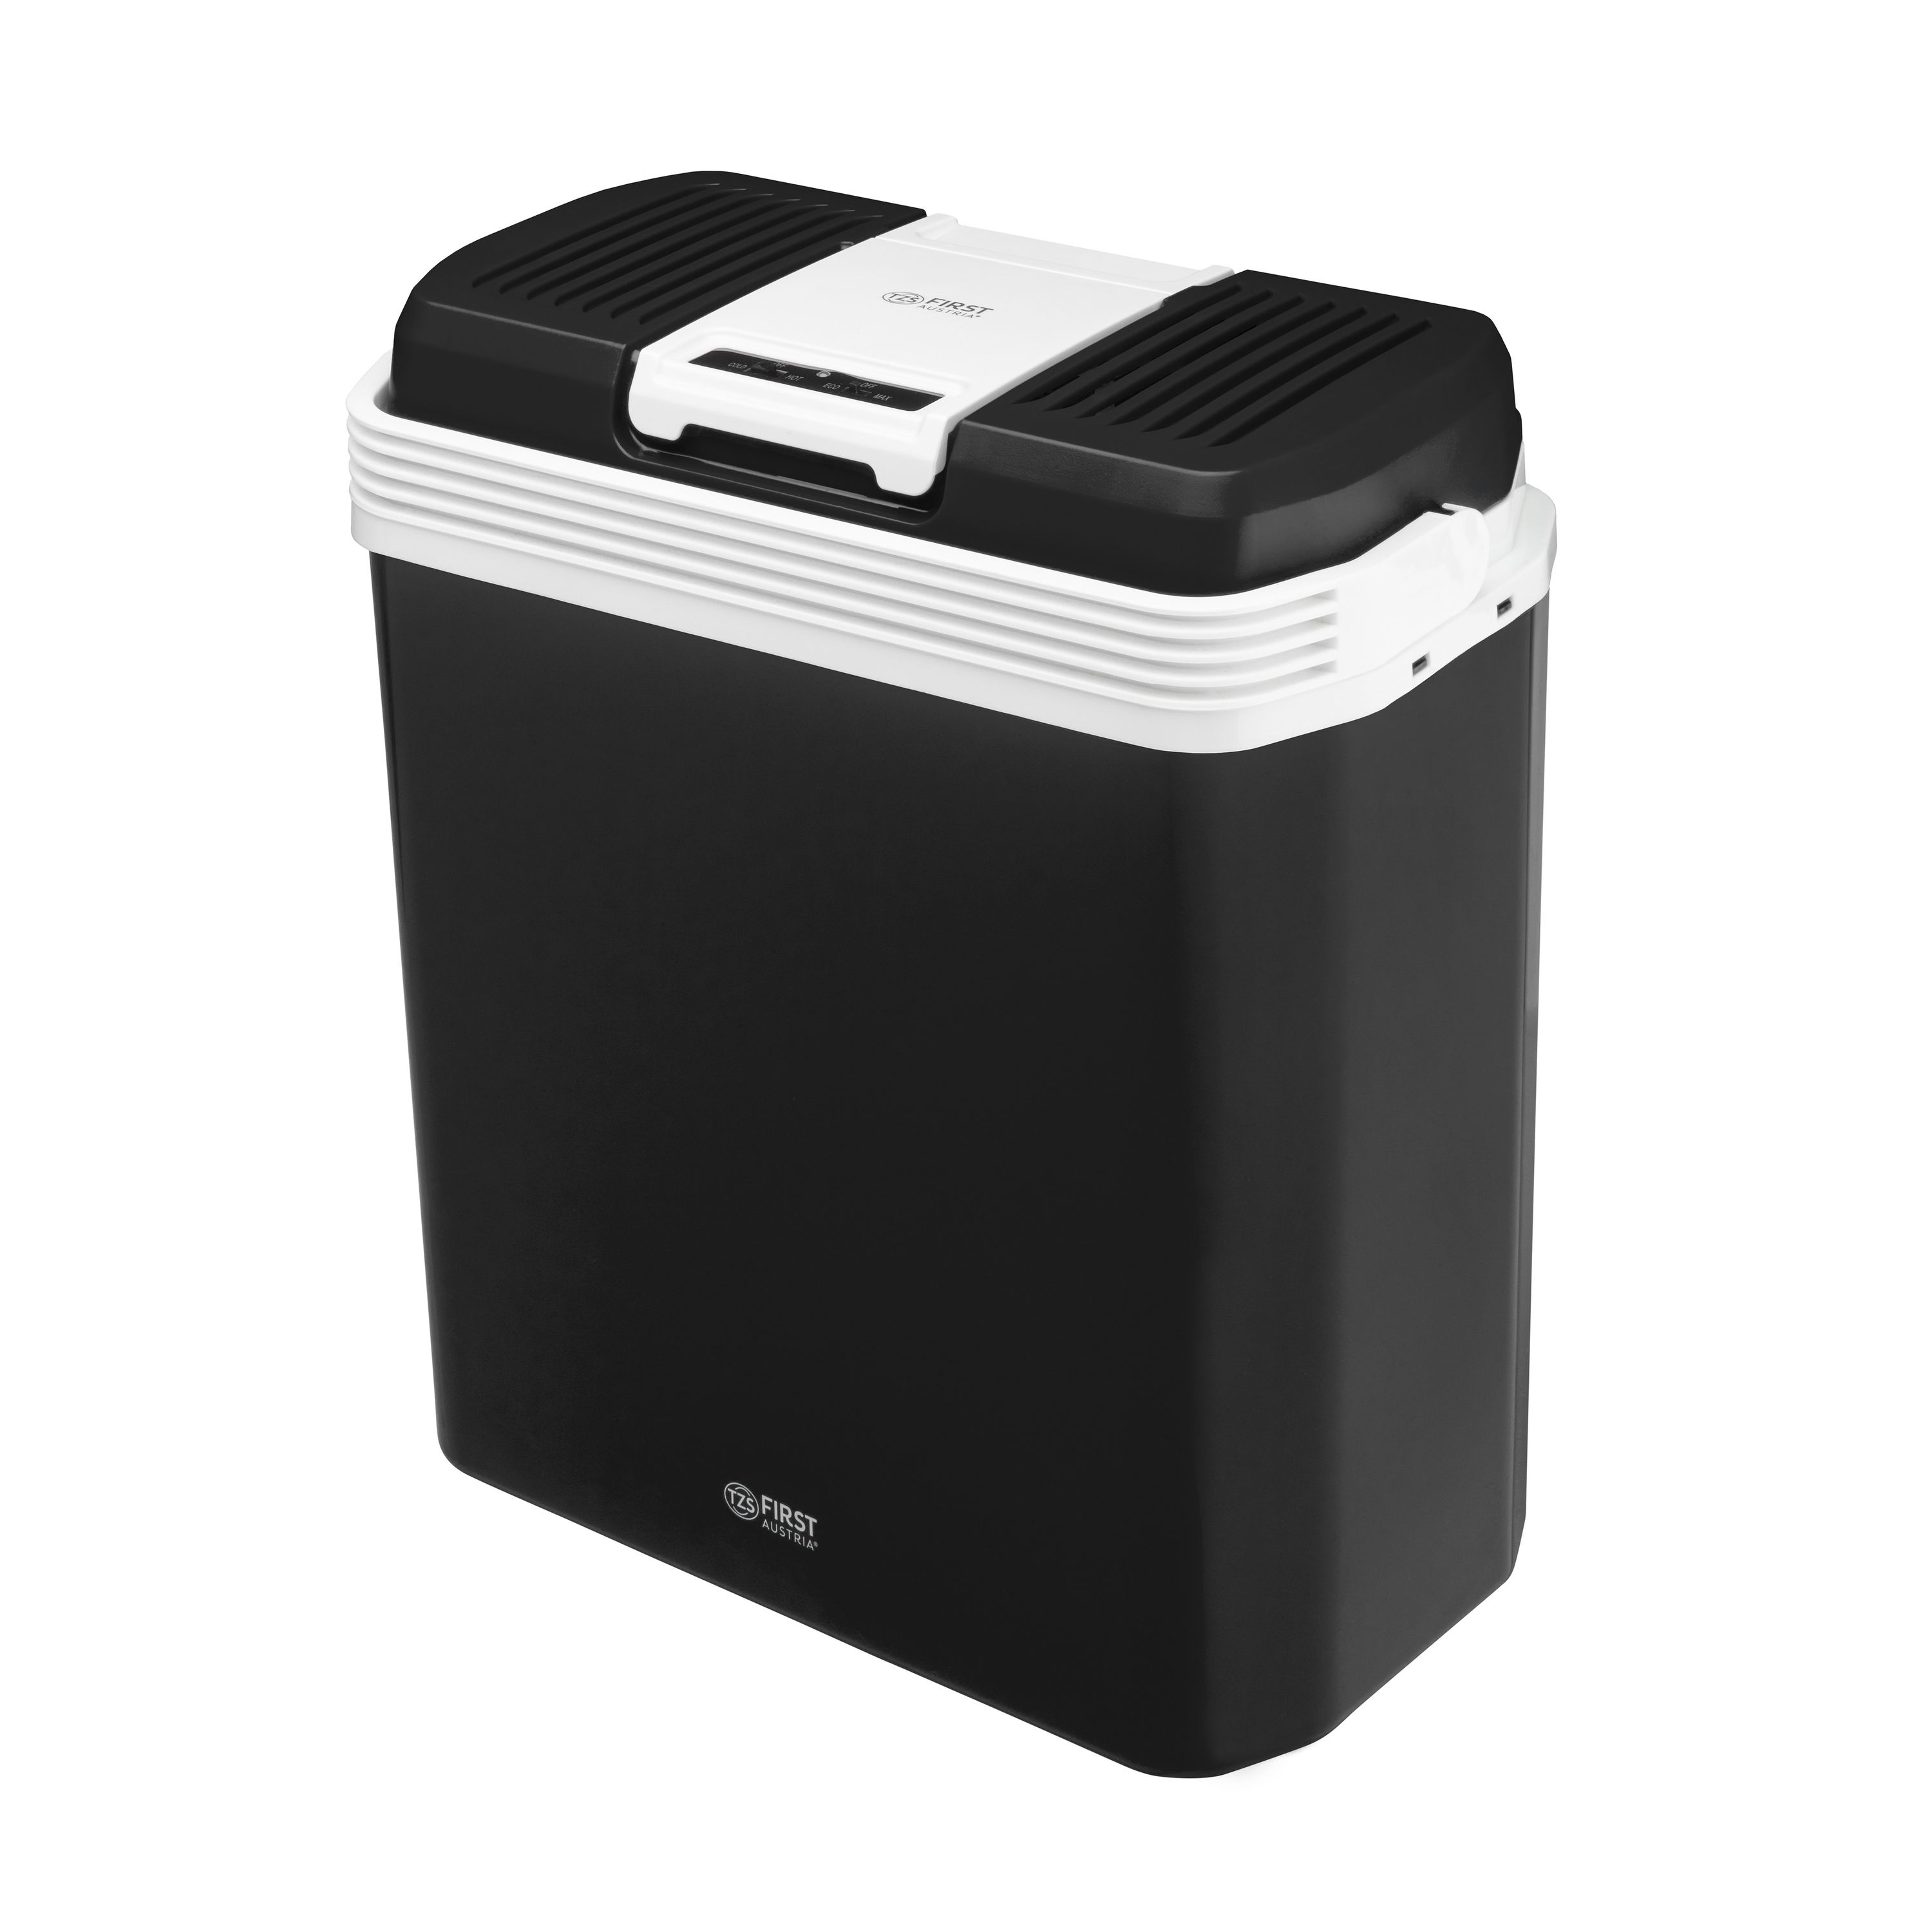 Thermoelectric cool box | 24 liters